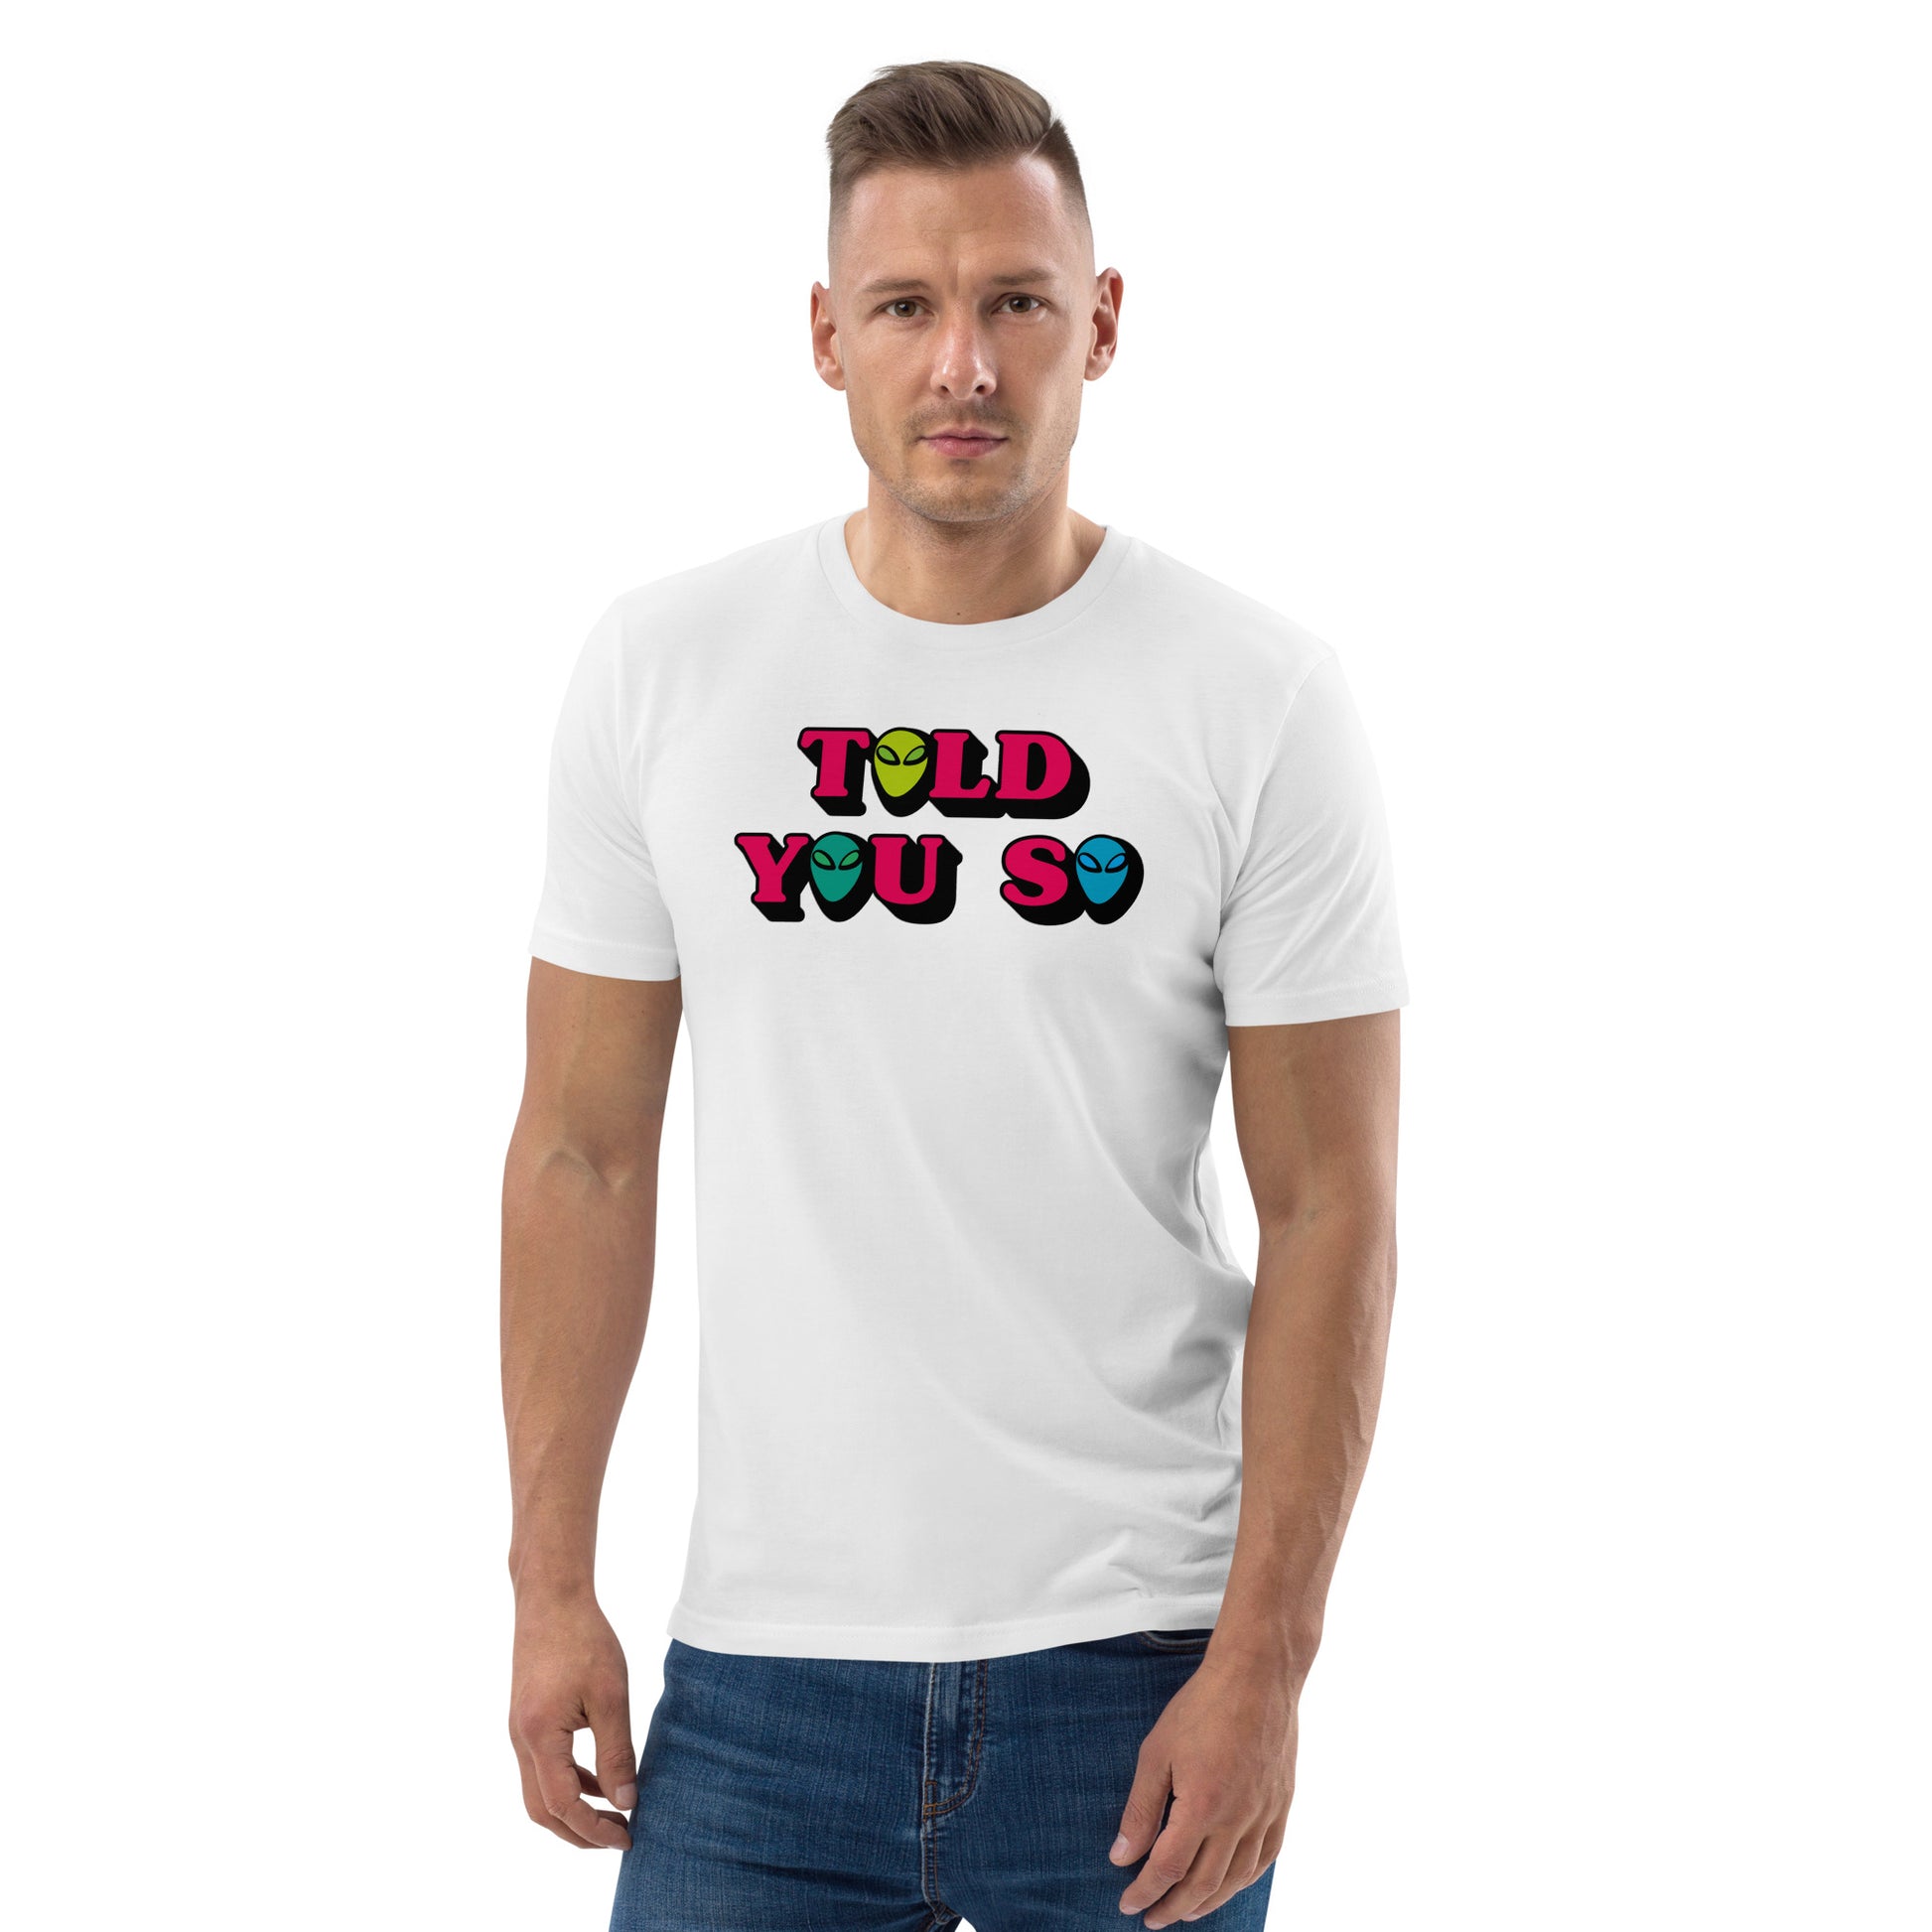 #WEIRDO | Our ‘TOLD YOU SO’ funny meme is printed at the front of this white, organic, cotton men’s t shirt and is for weirdos who know that the Aliens are already here on earth with us.